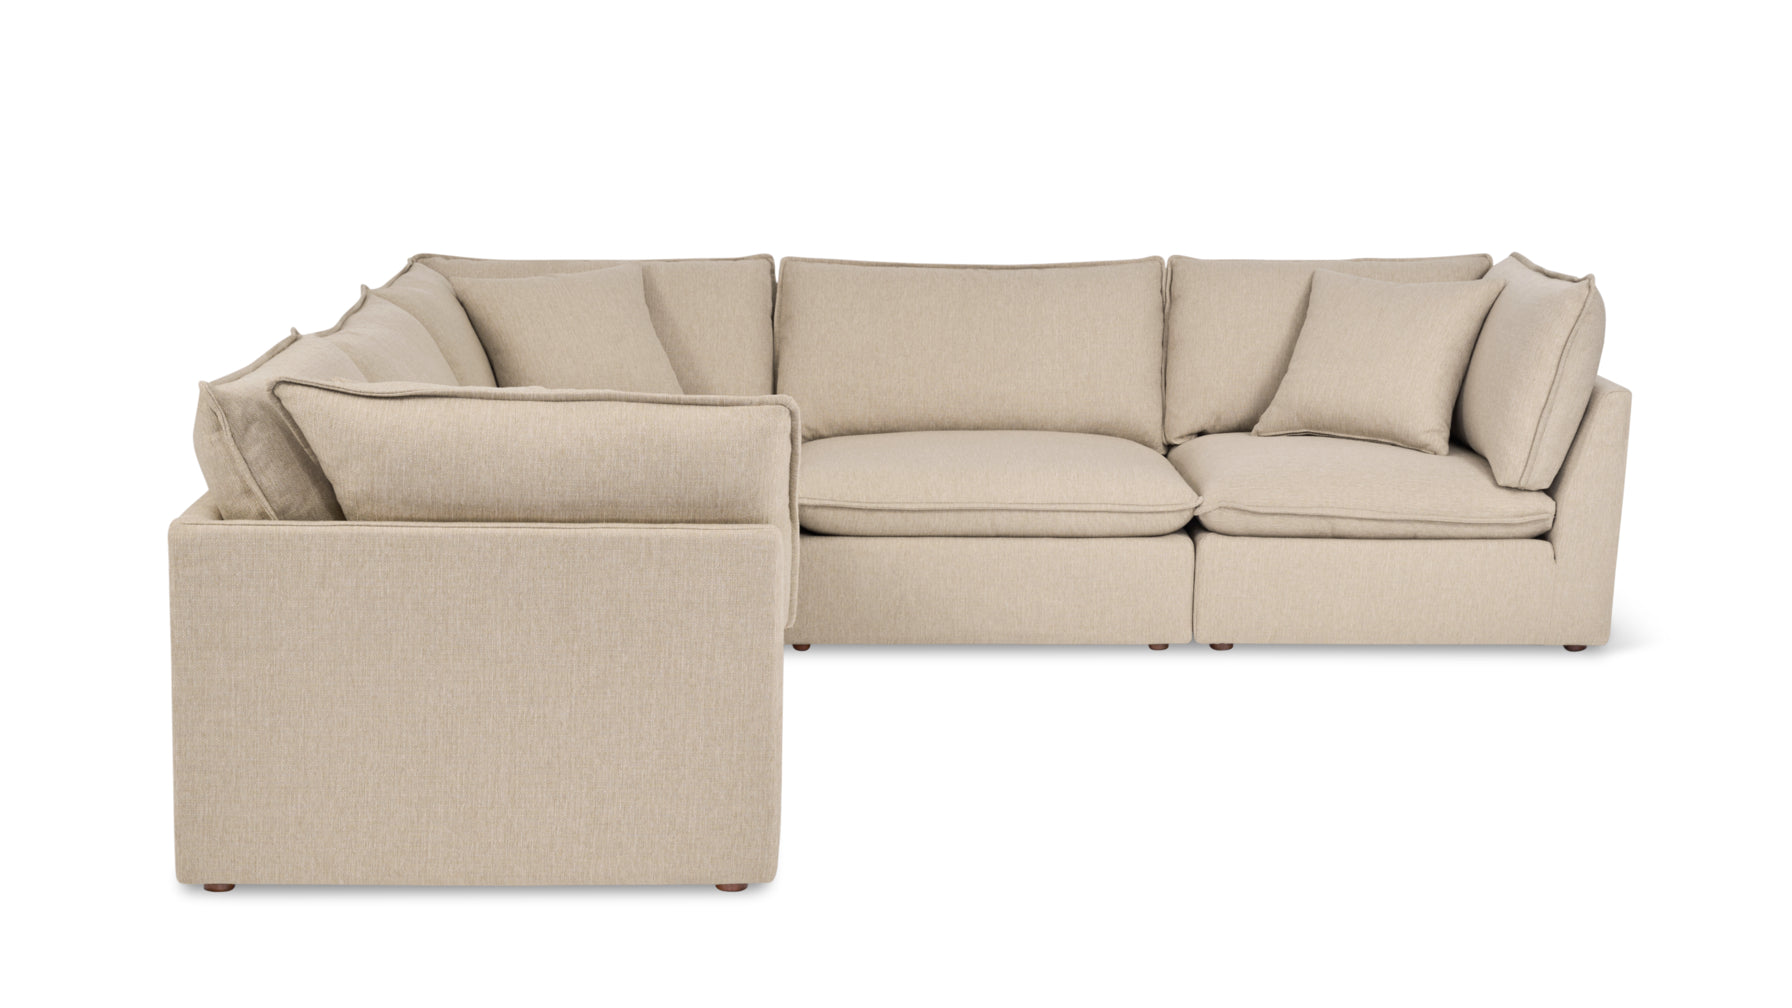 Chill Time 5-Piece Modular Sectional Closed, Biscuit - Image 1